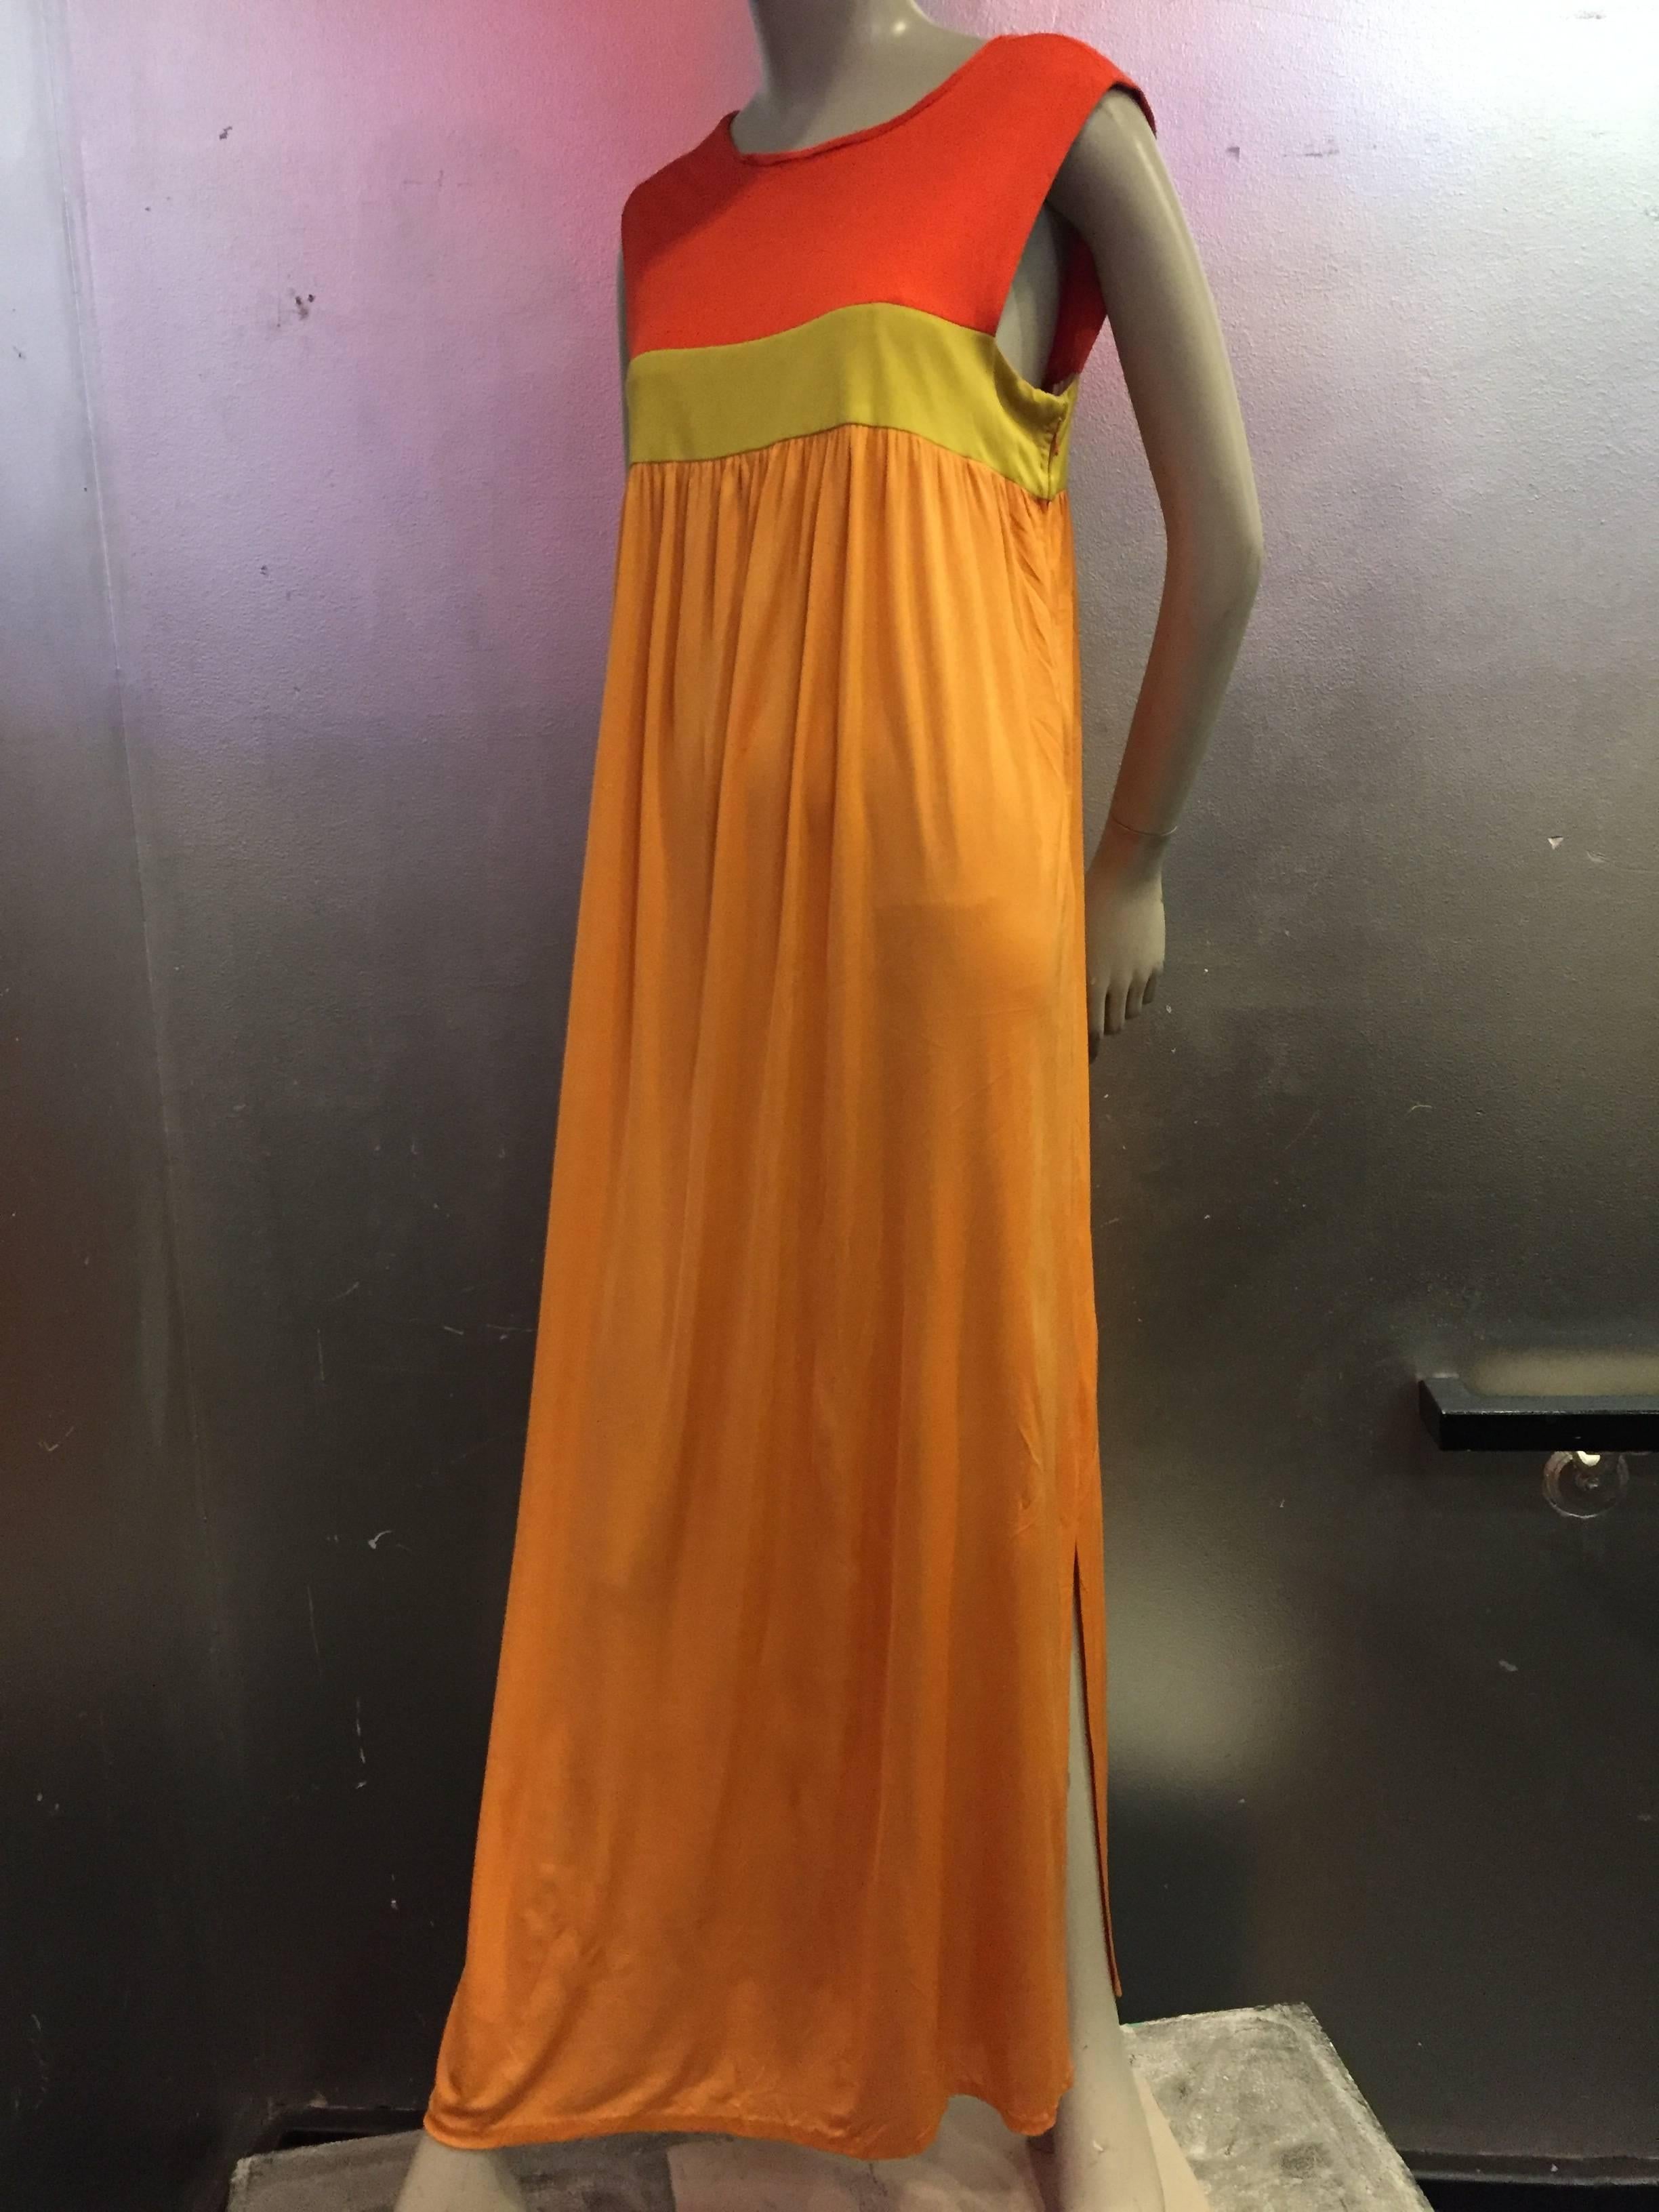 A fabulous and unusual 1960s Emilio Pucci color block Empire maxi gown in persimmon, chartreuse and tangerine color silk jersey.  Buttons at back of neck. Side slit. 